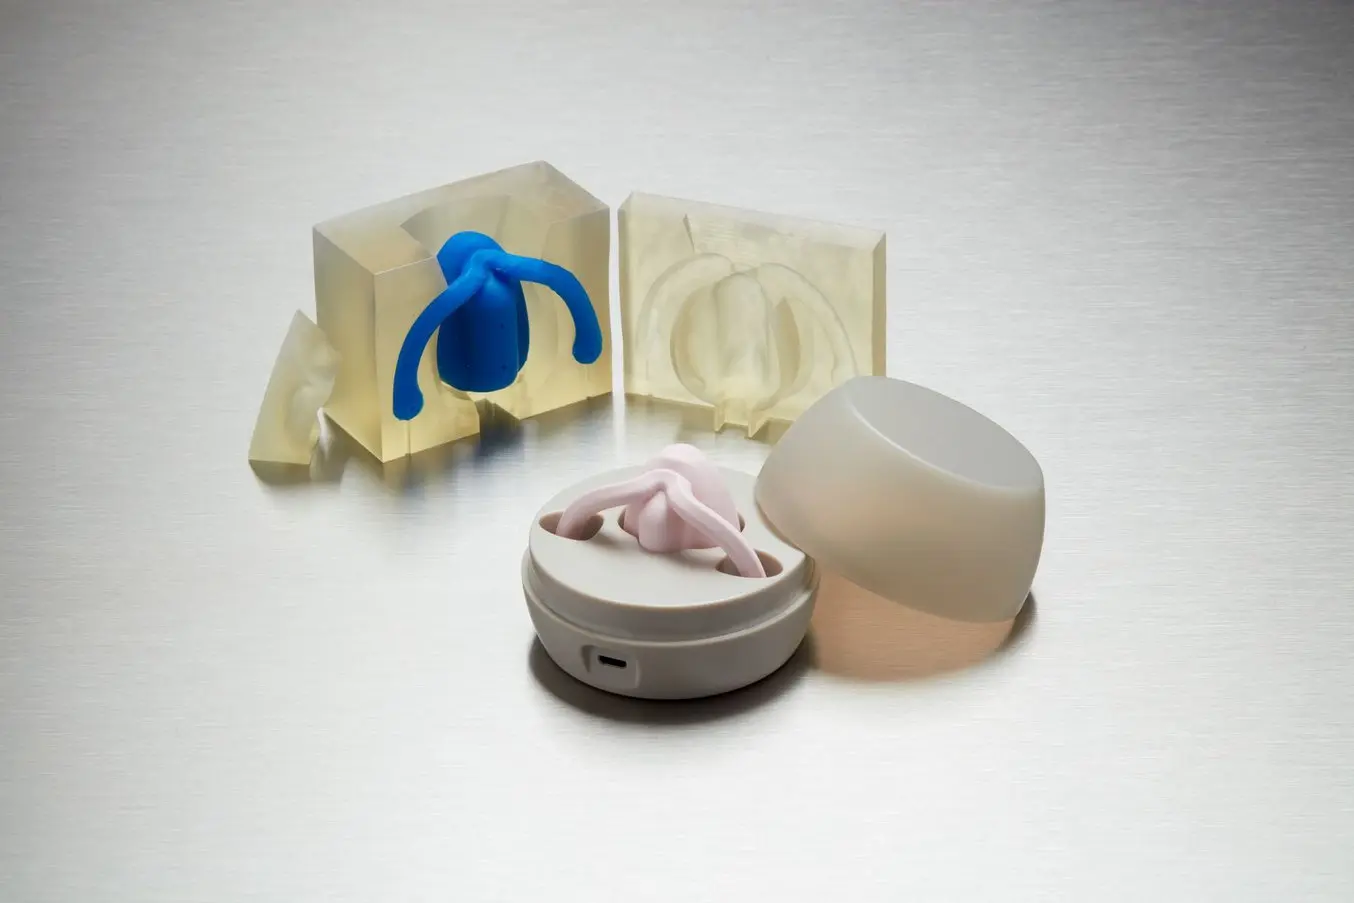 Dame Products employs silicone overmolding with 3D printed molds to produce customer beta prototypes.